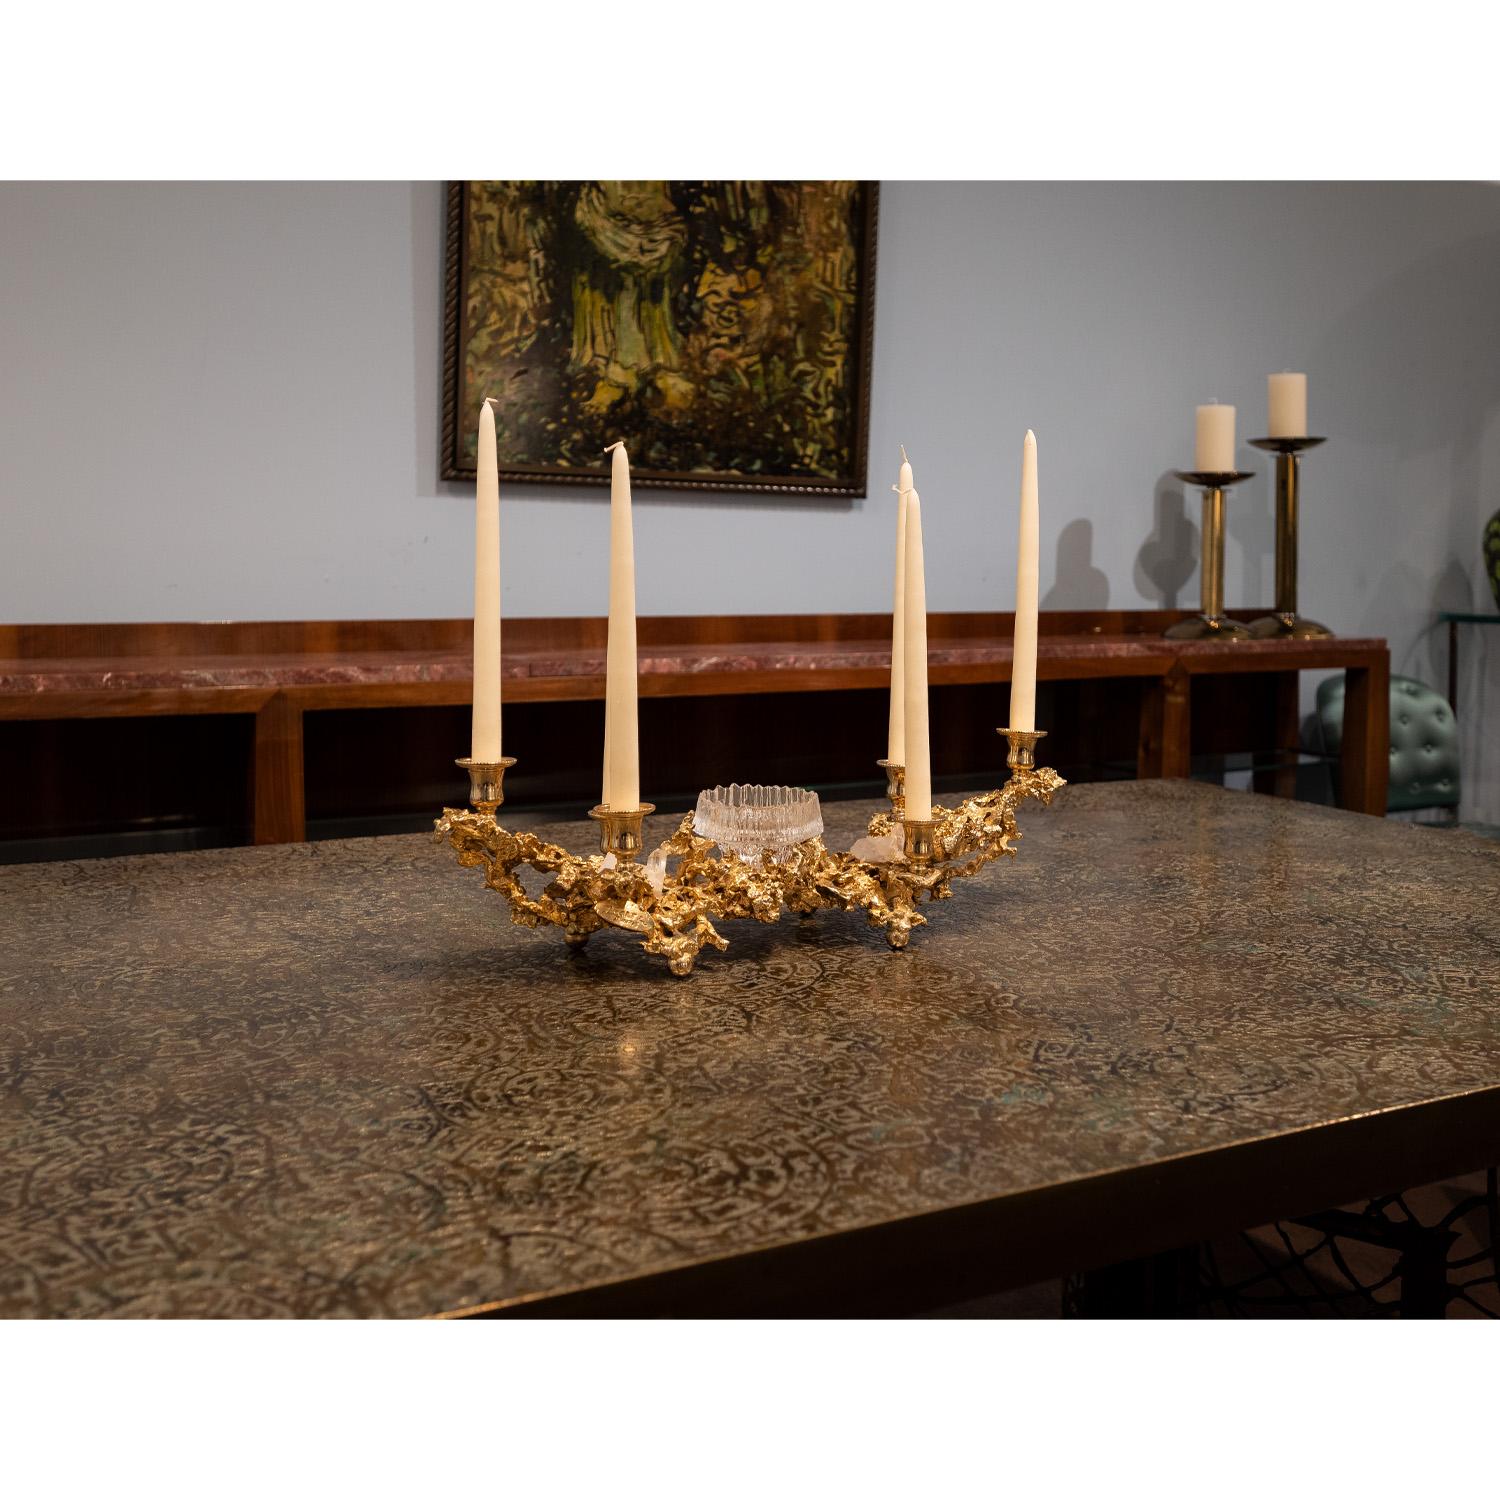 Boeltz Candelabra Centerpiece in Gold with Rock Crystals 1970s 'Signed' For Sale 2